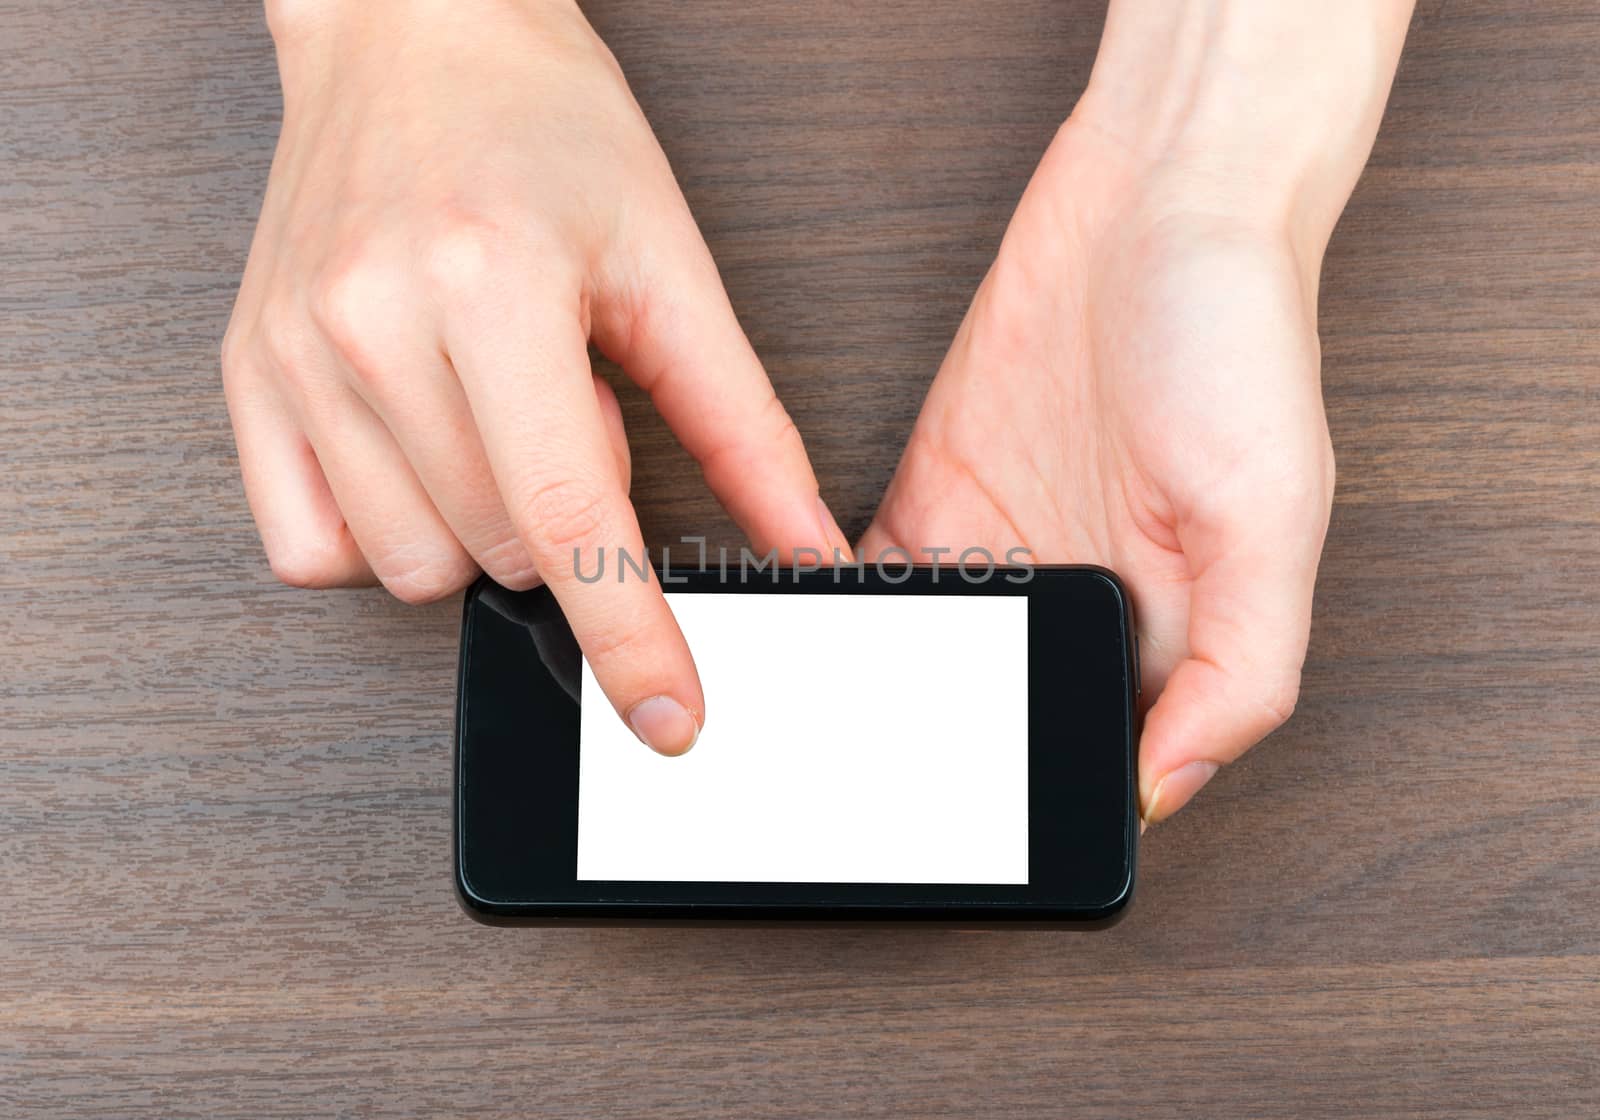 Humans hands holding smartphone on wooden table